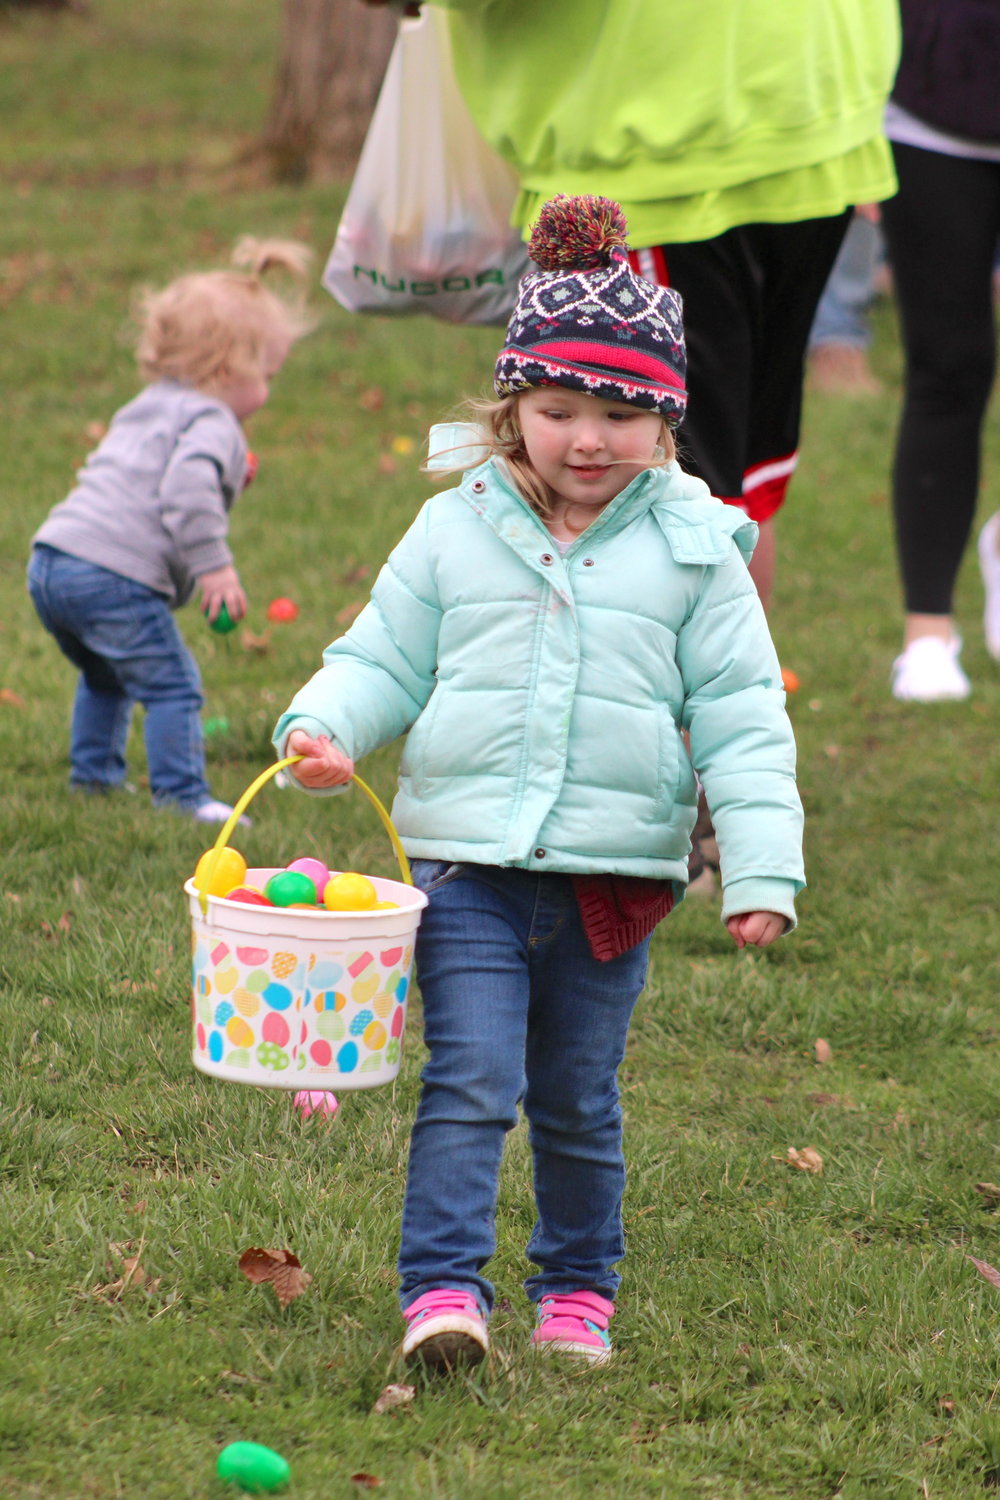 Ada Wilson, 3, hatches a plan to collect her next Easter egg.